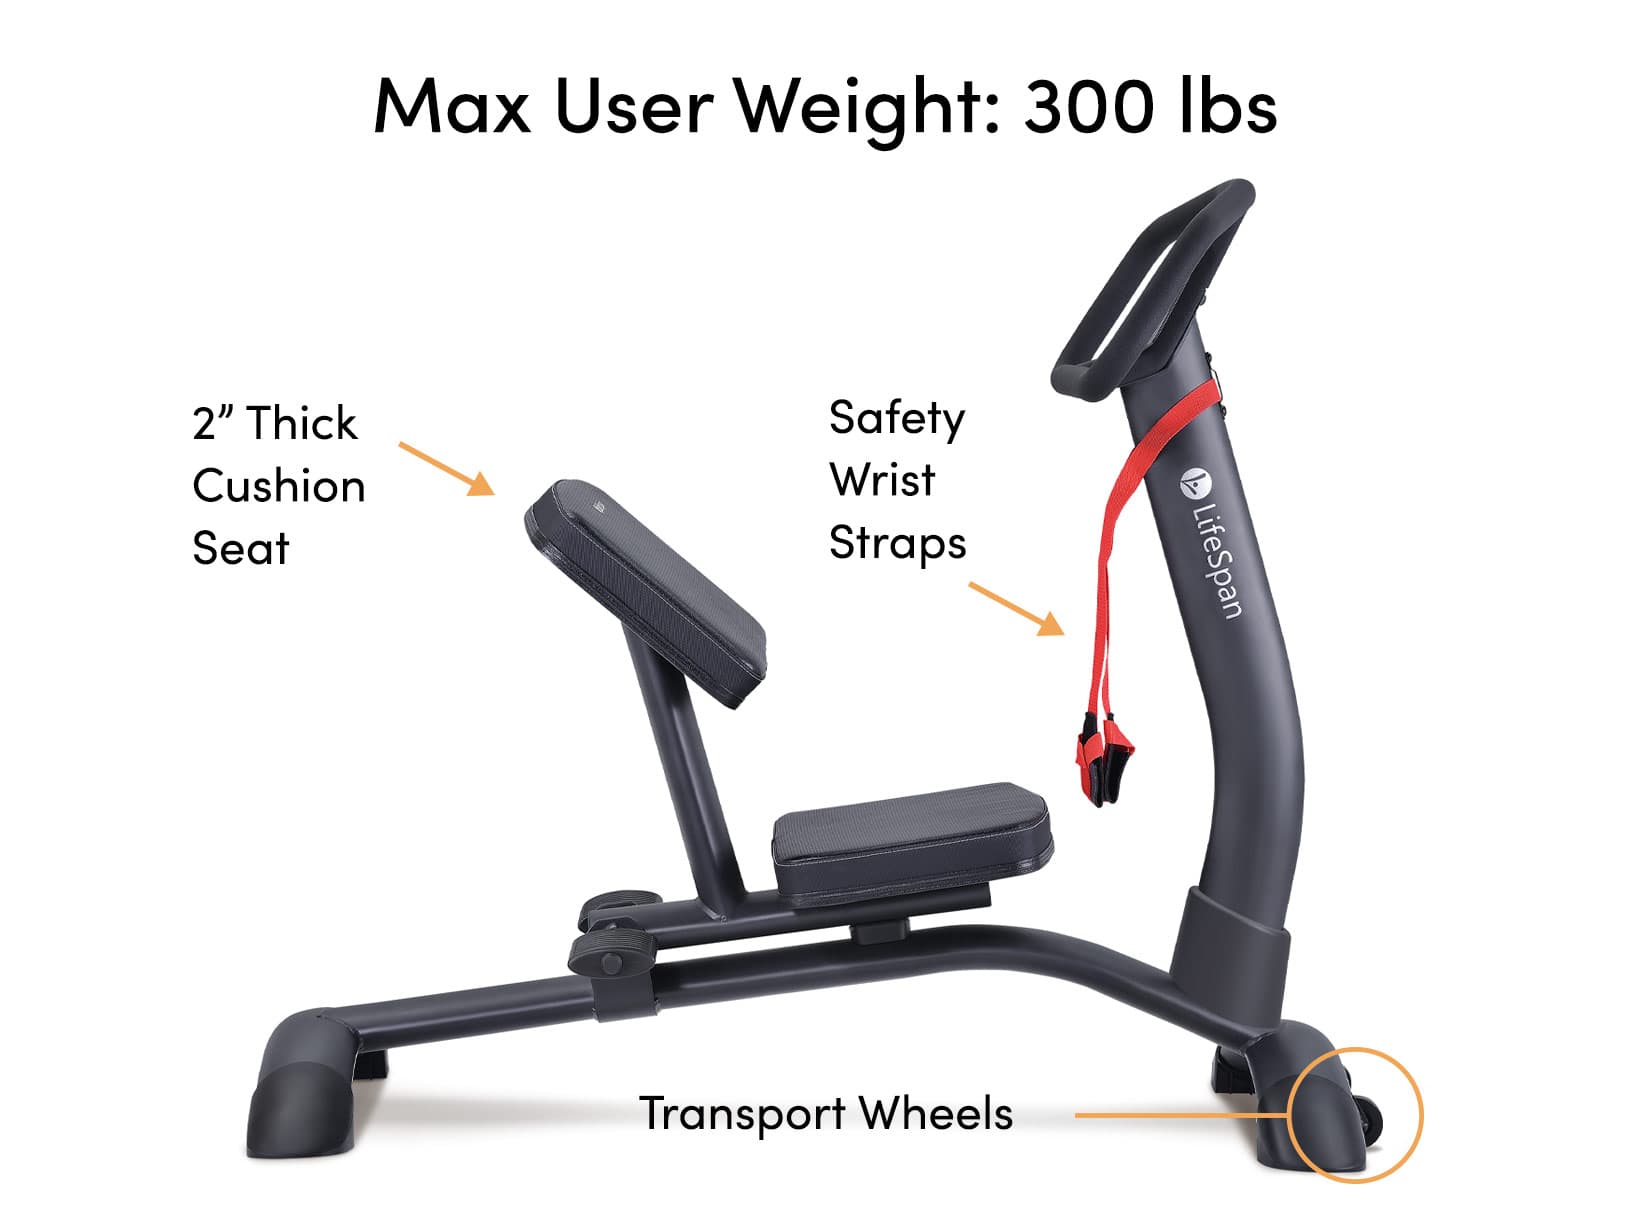 Pros of the LifeSpan Fitness SP1000 Stretch Pro Compared to Competitors